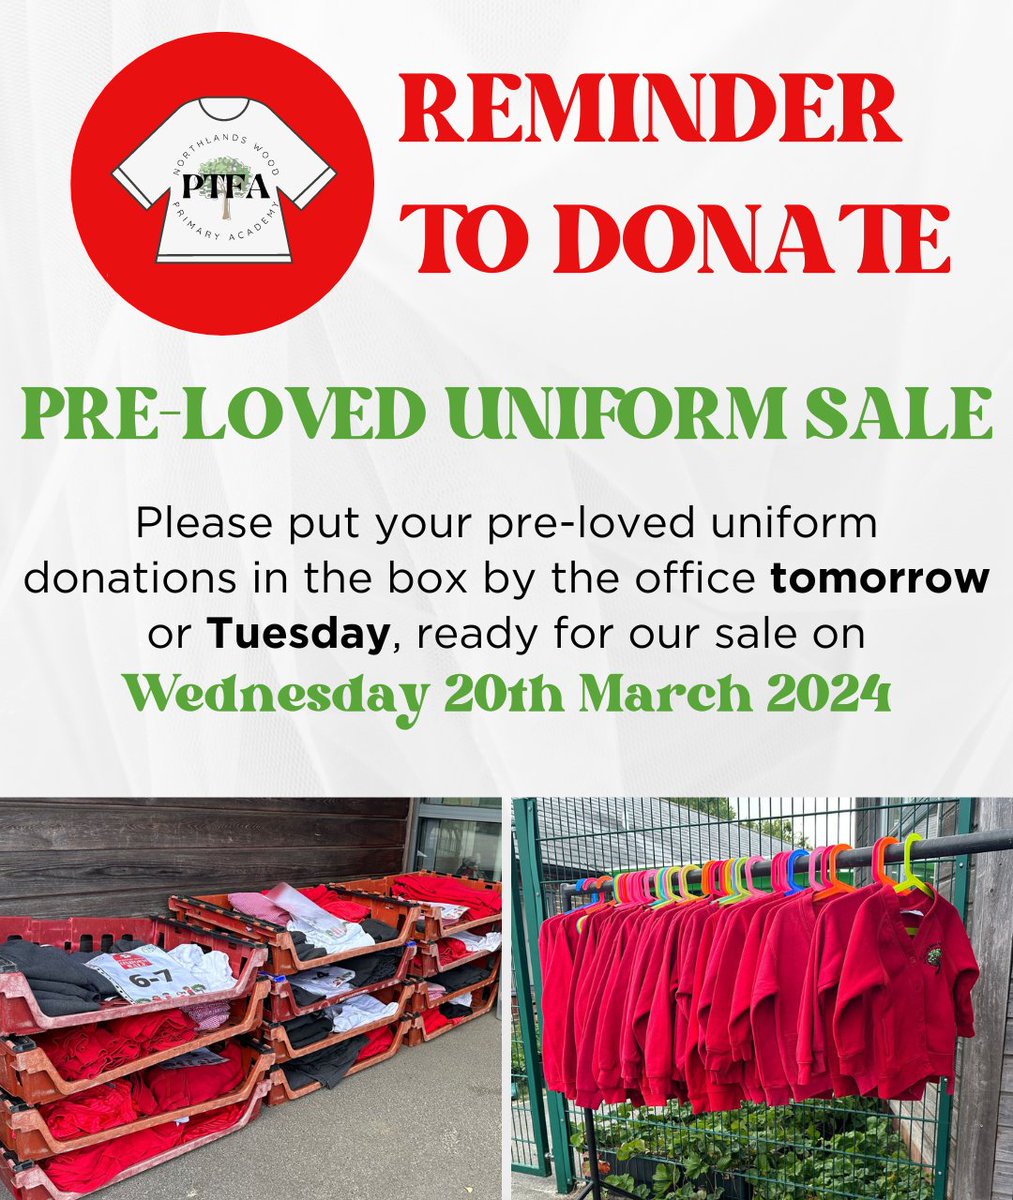 Our next pre-loved uniform sale will be on Wednesday 20th March - clear out your child's outgrown uniform and stock up ready for the Summer term! Donations can be left in the box outside of the office on Monday 18th/Tuesday 19th. Thank you! @Northlandstweet